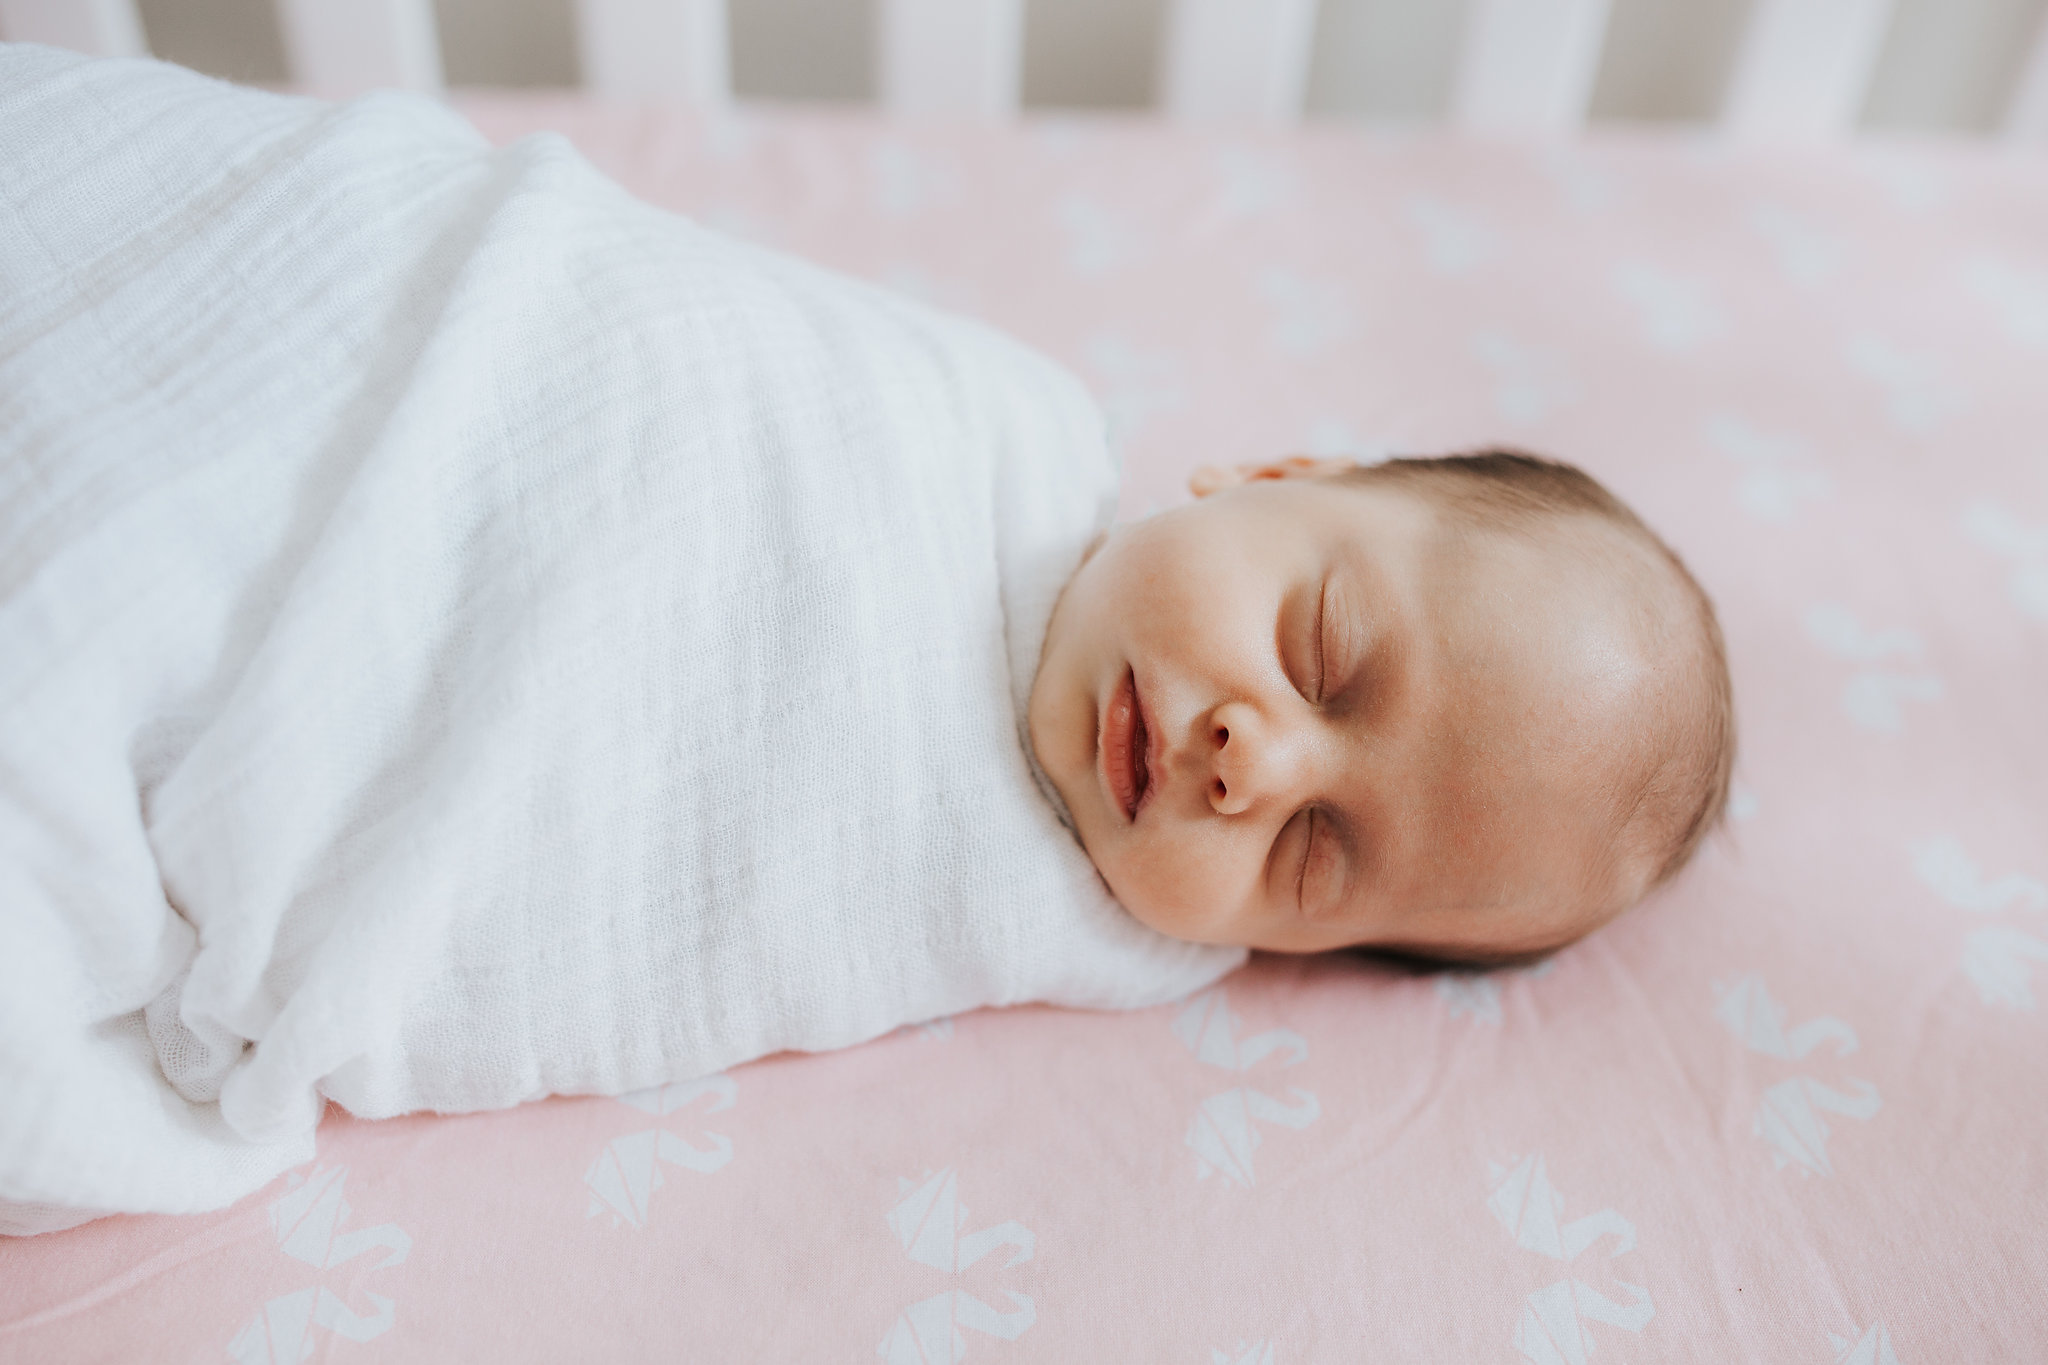 4 week old baby girl in white swaddle sleeping in crib with pink sheets - Newmarket Lifestyle Photography